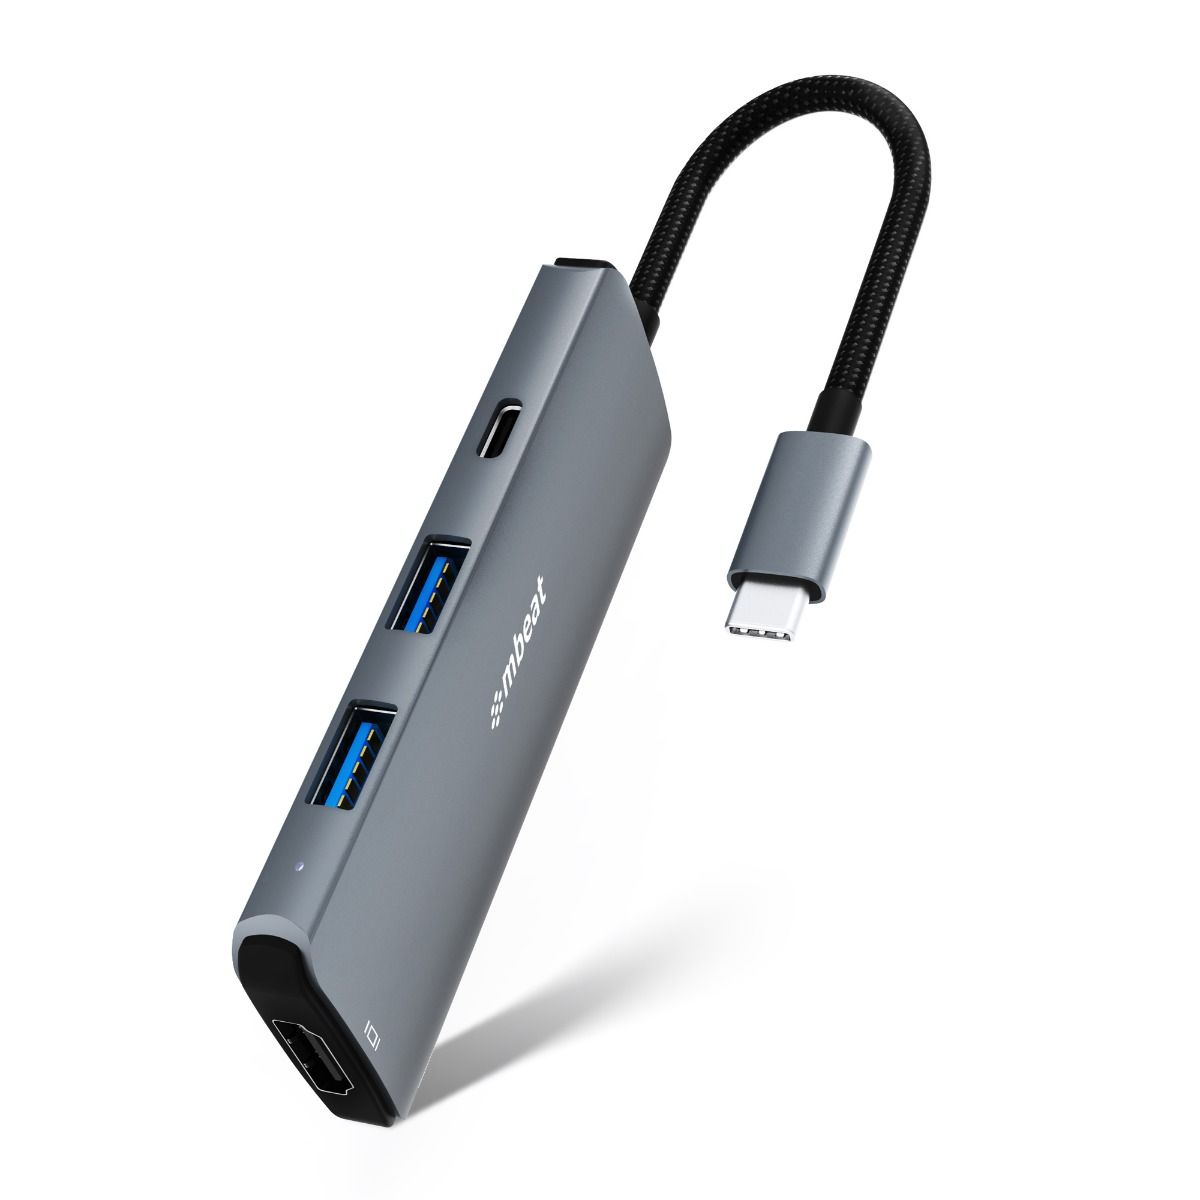 Multifunctionality: 7-in-1 USB-C 3.2 Gen2 Hub with 8K Video and 10Gbps